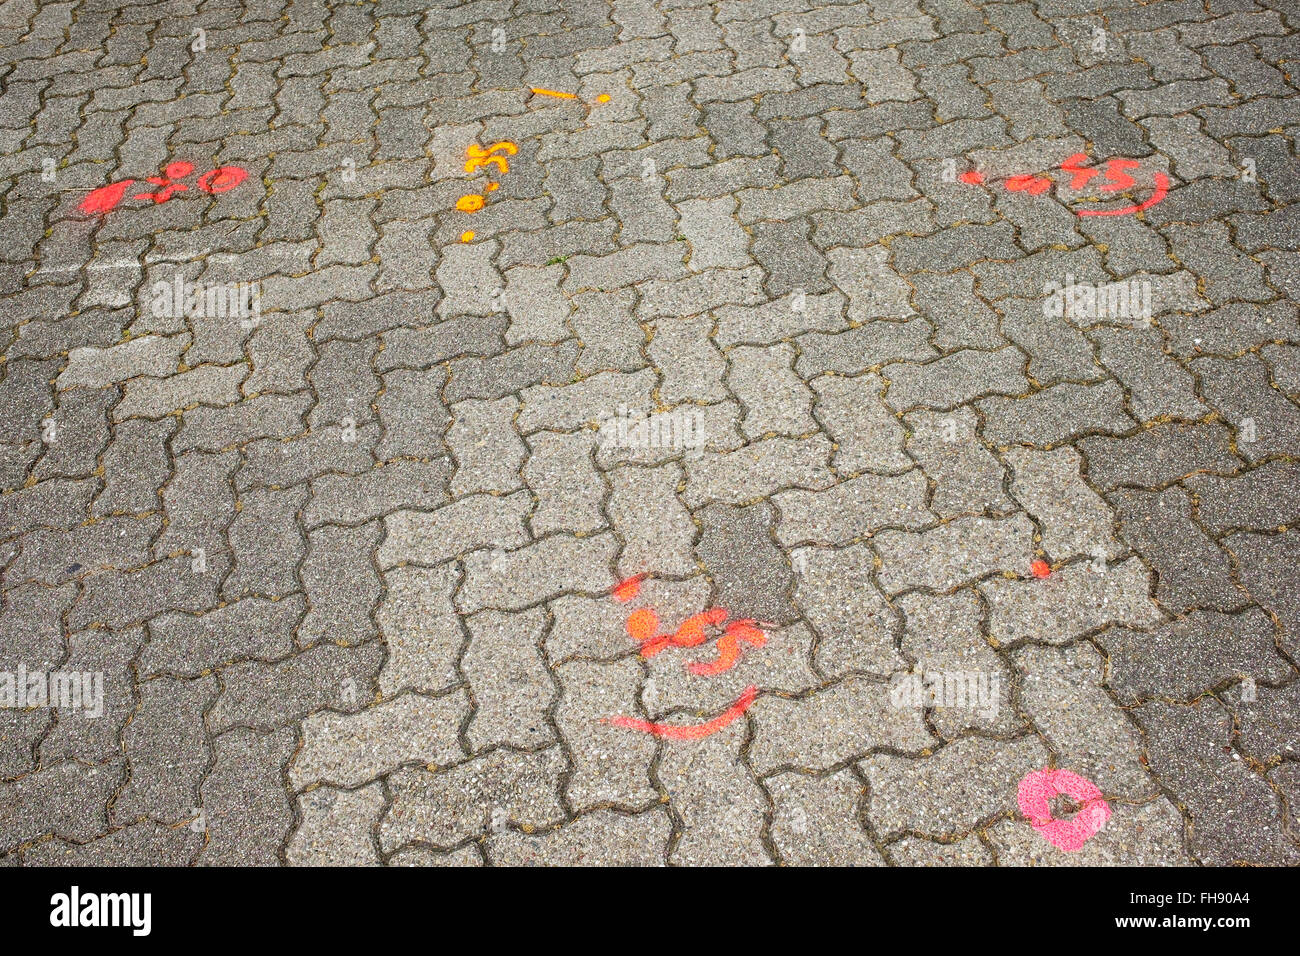 Cobbled pavement with markings before civil engineering works, France, Europe Stock Photo